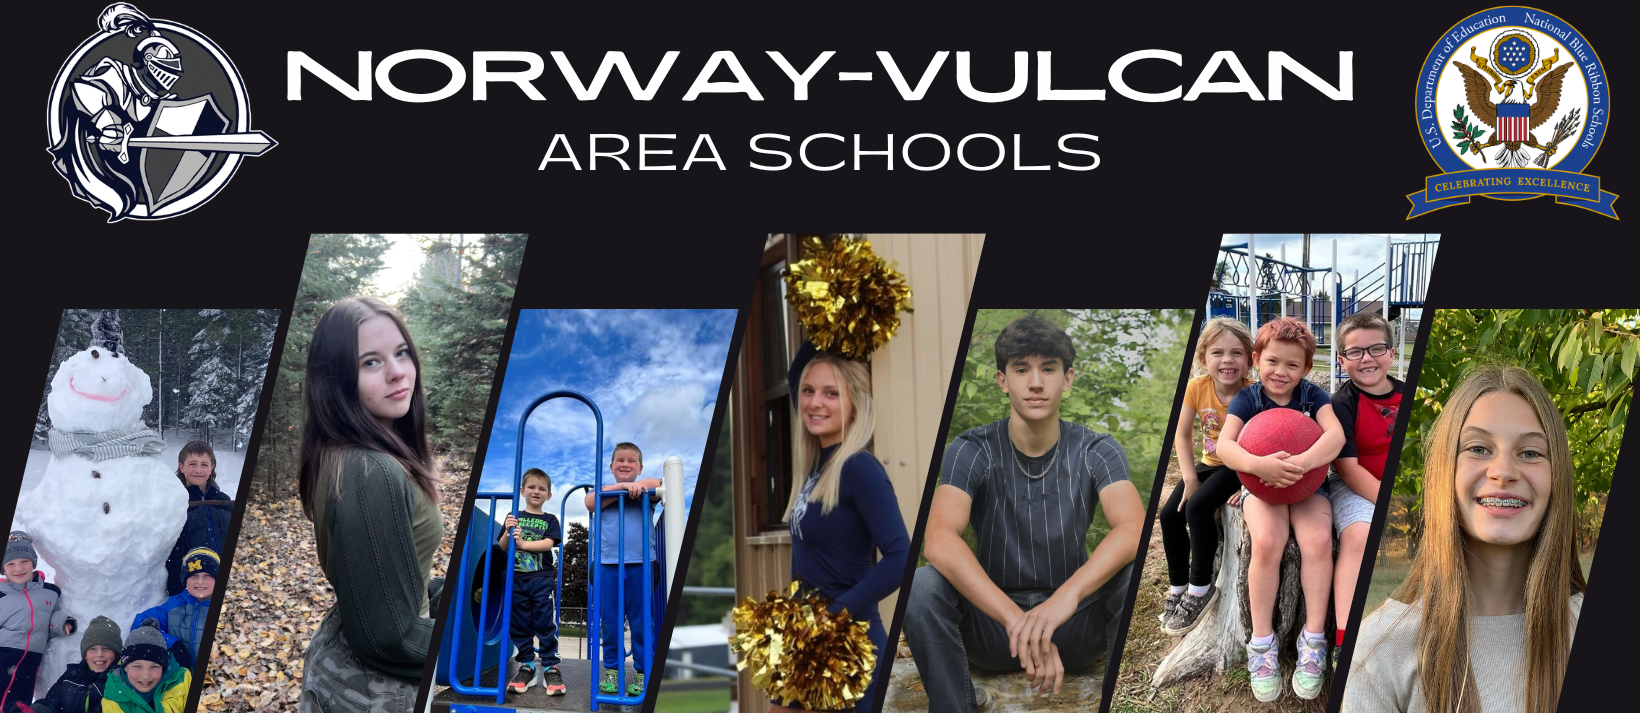 logo of Norway-Vulcan Area Schools and photos of students